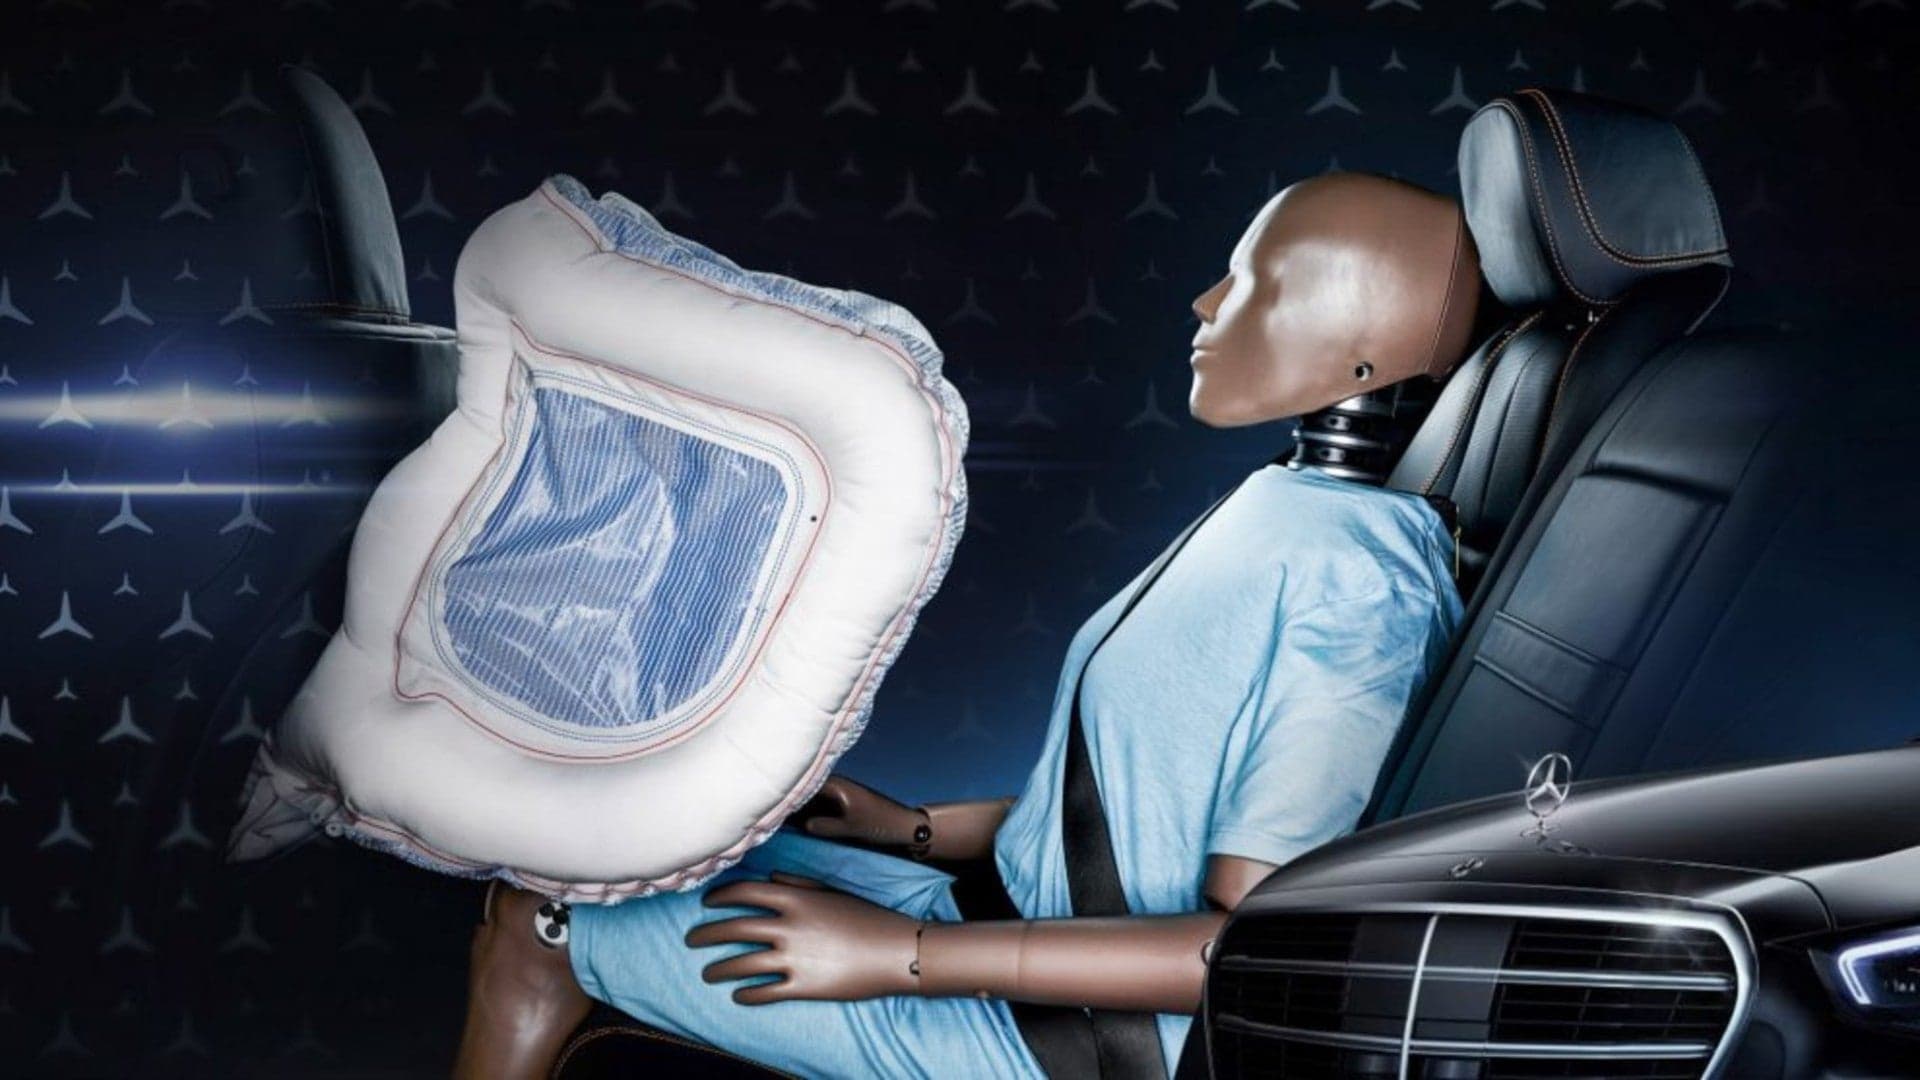 The 2021 Mercedes-Benz S-Class Will Be the First Production Car With Rear Seat Airbags